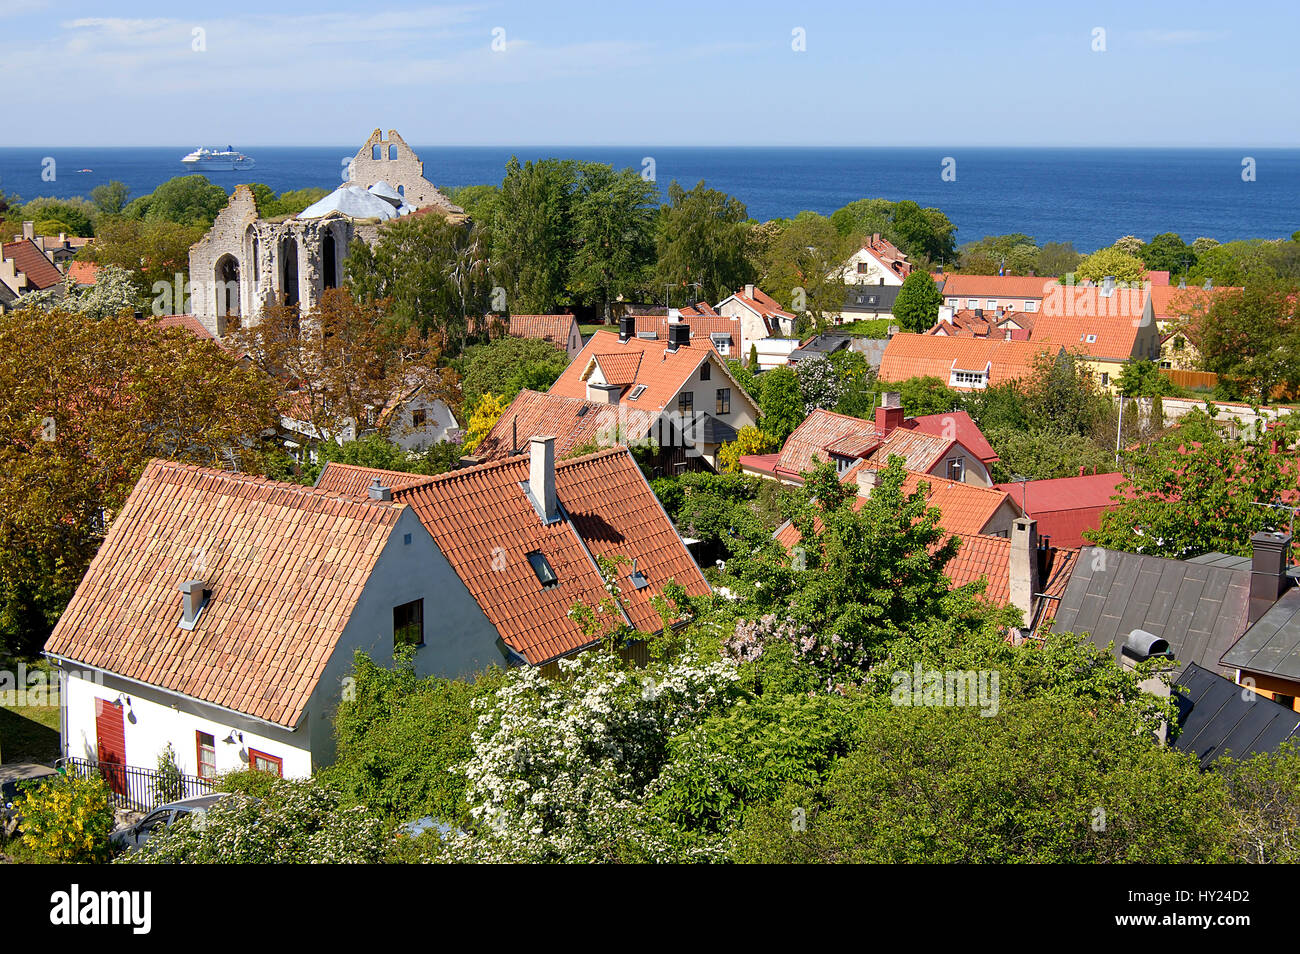 The Stock Photo shows a view over the red roofs of the Harbor town of Visbyon the Island of Gotland in Sweden. The image was taken from the top of the Stock Photo